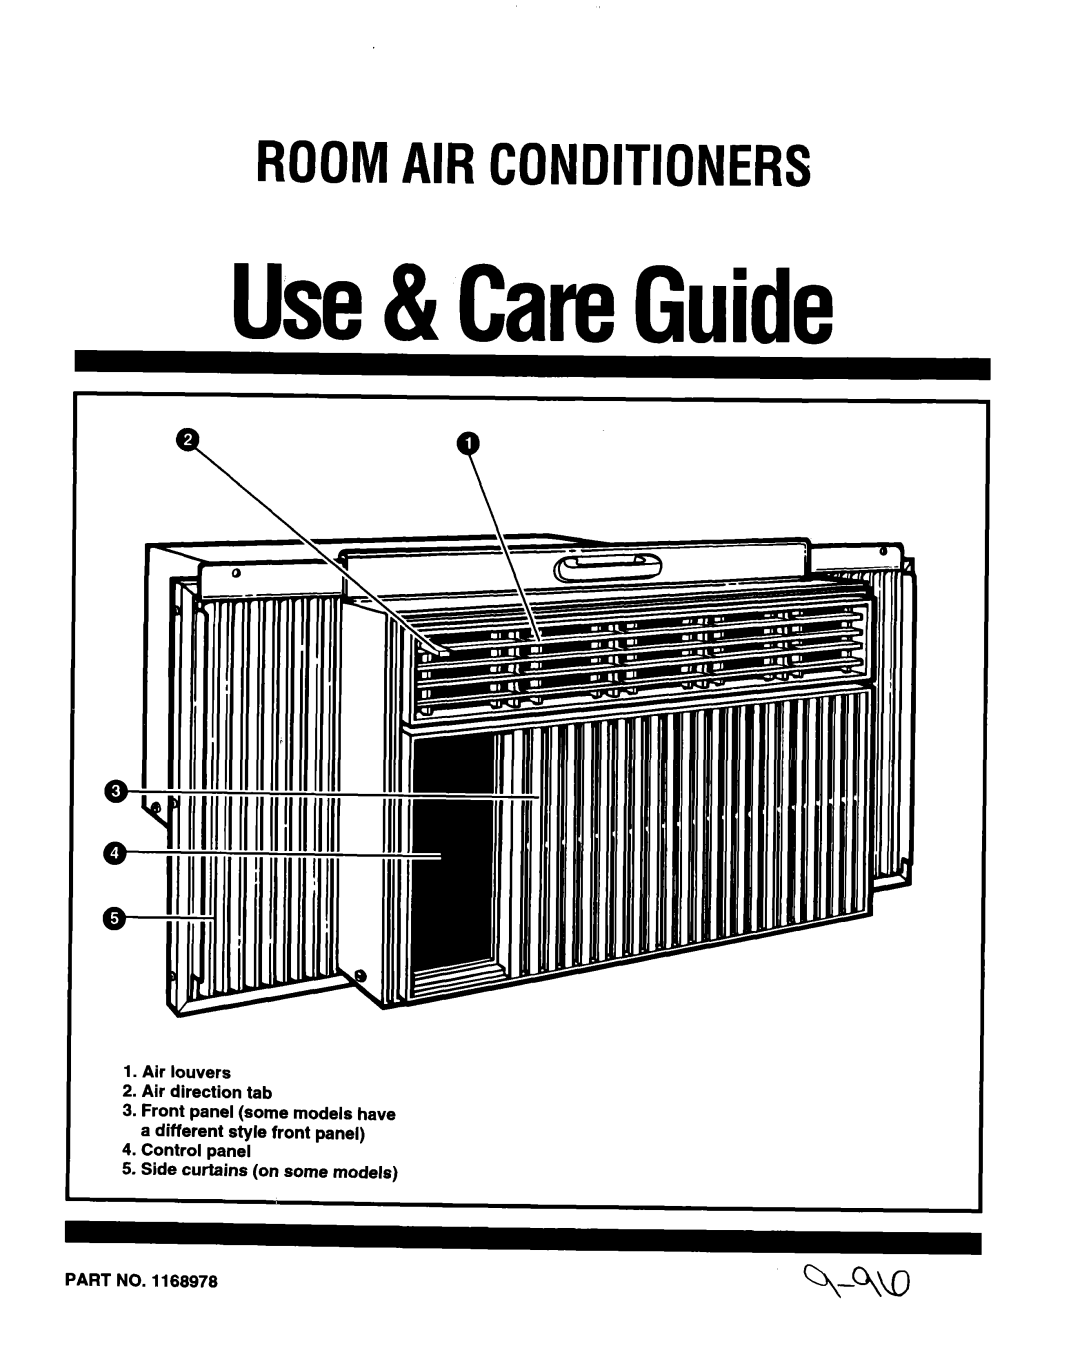 Whirlpool TA07002F0 manual Use&CareGuide, Roomairconditioners, Air louvers 2.Air direction tab 